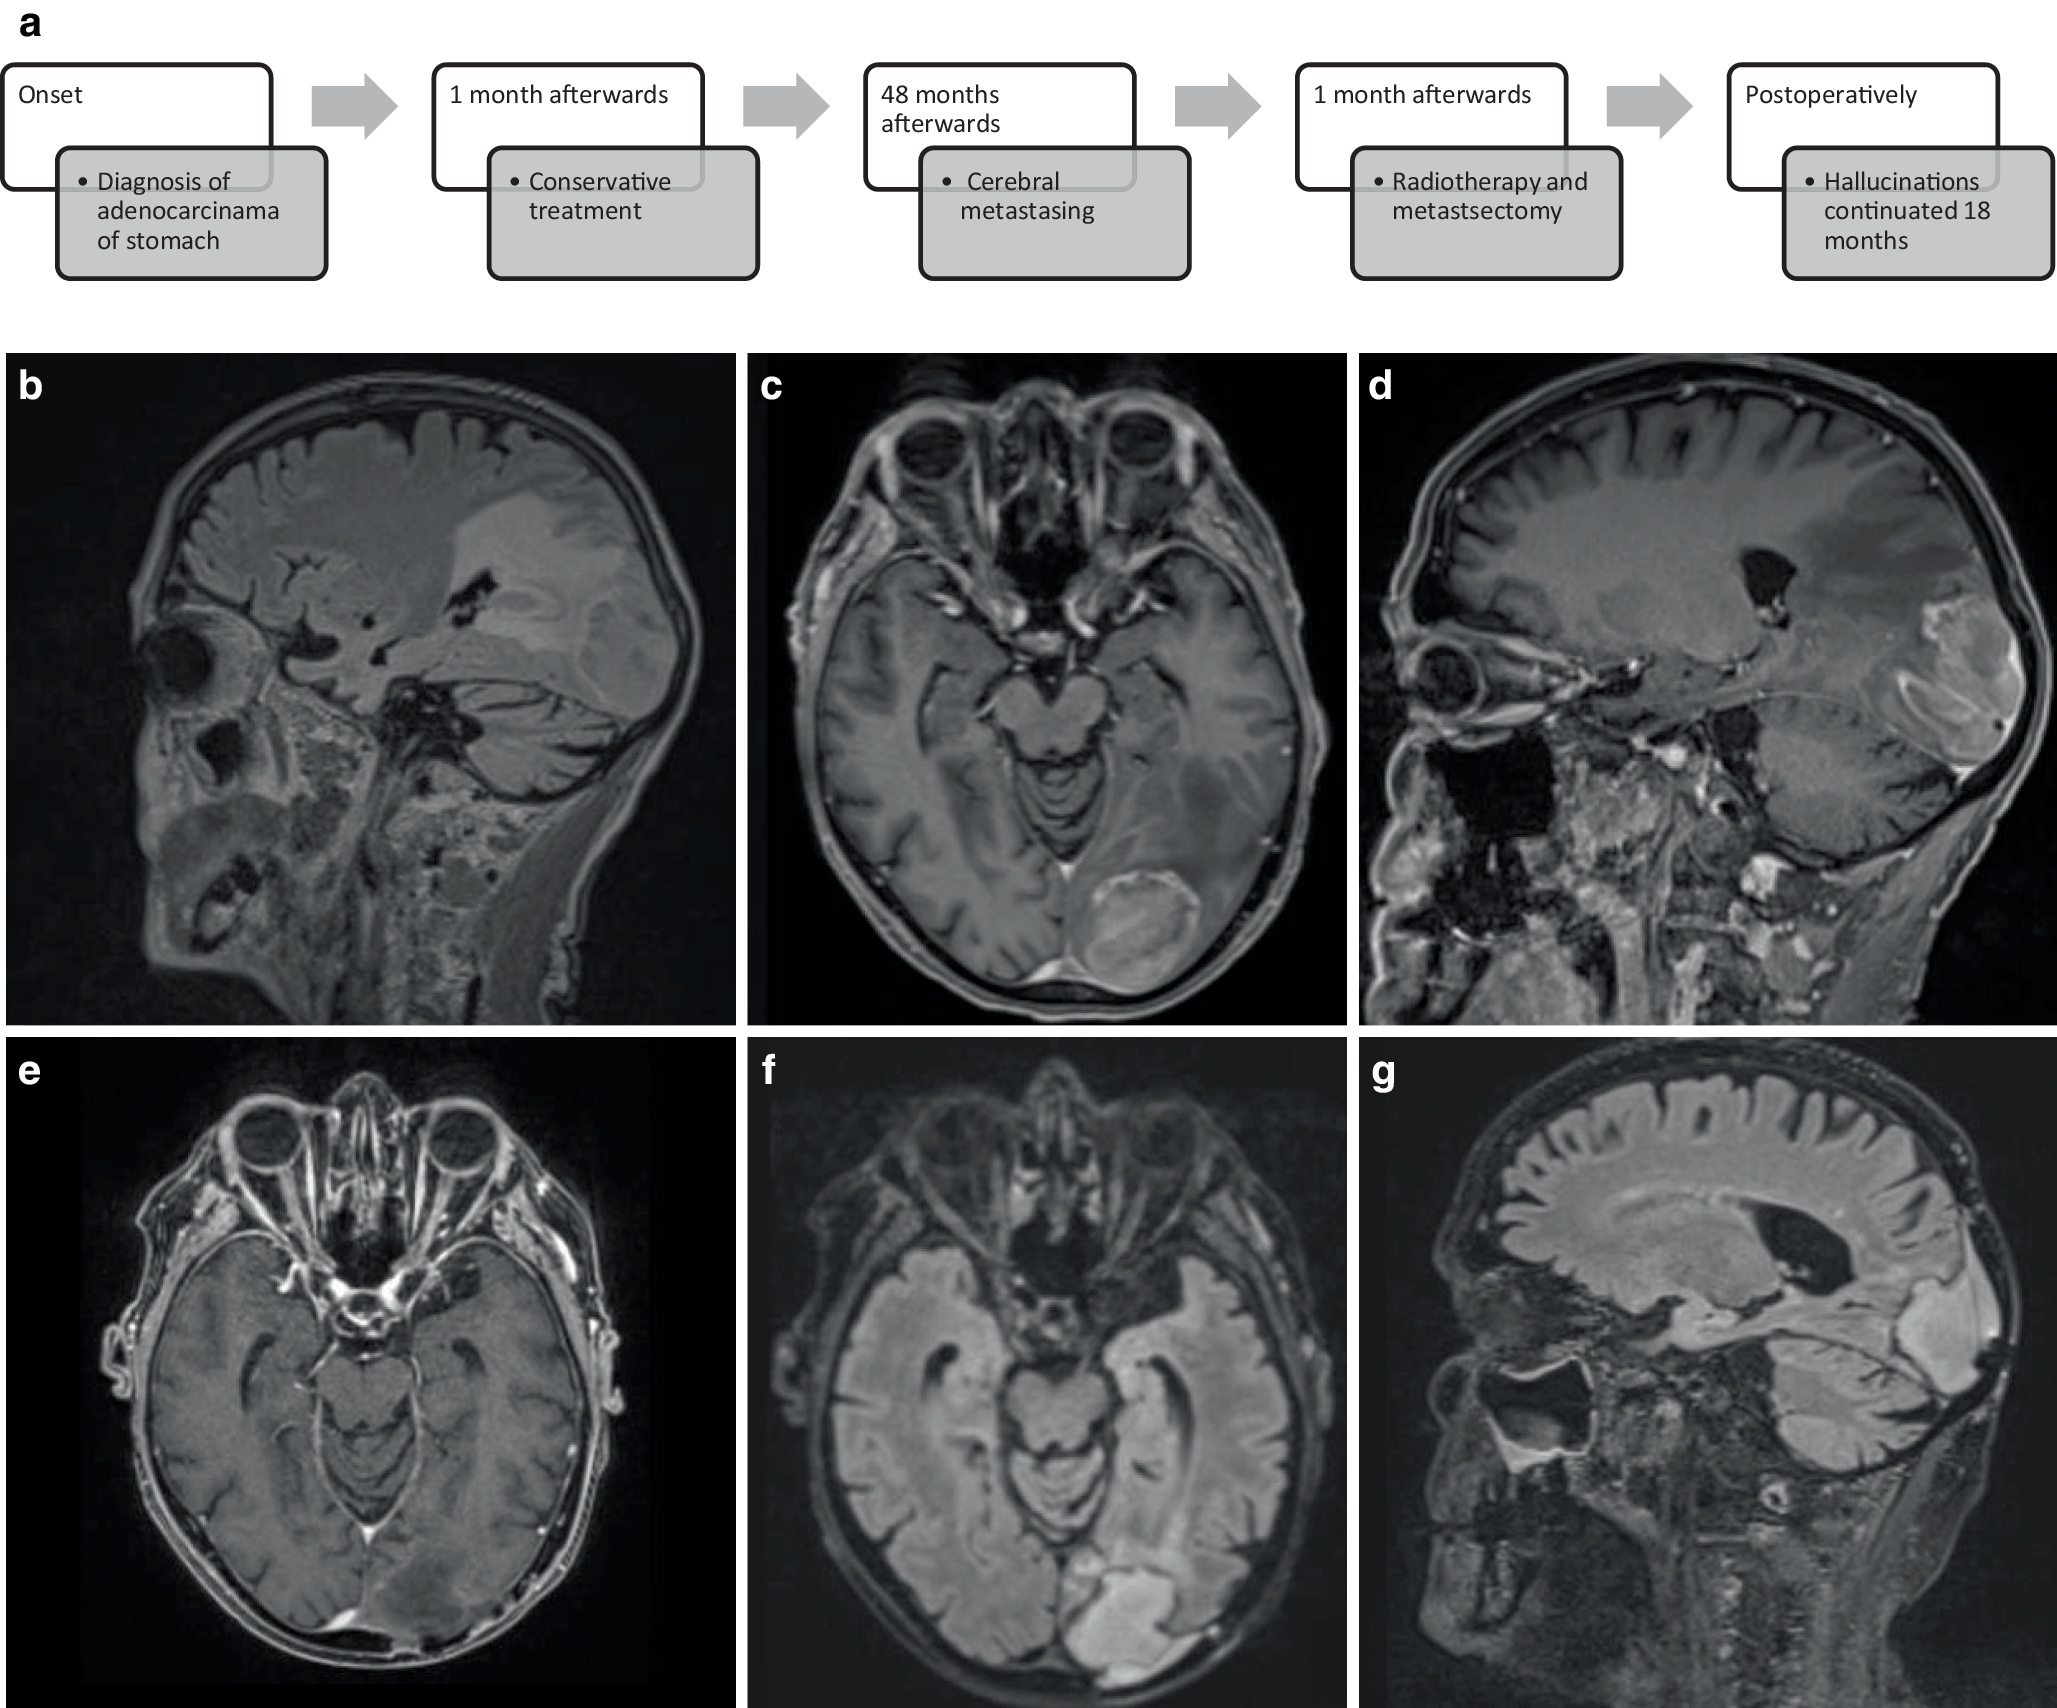 Visual hallucinations after resection of cerebral metastases: two patients with complex phantom images